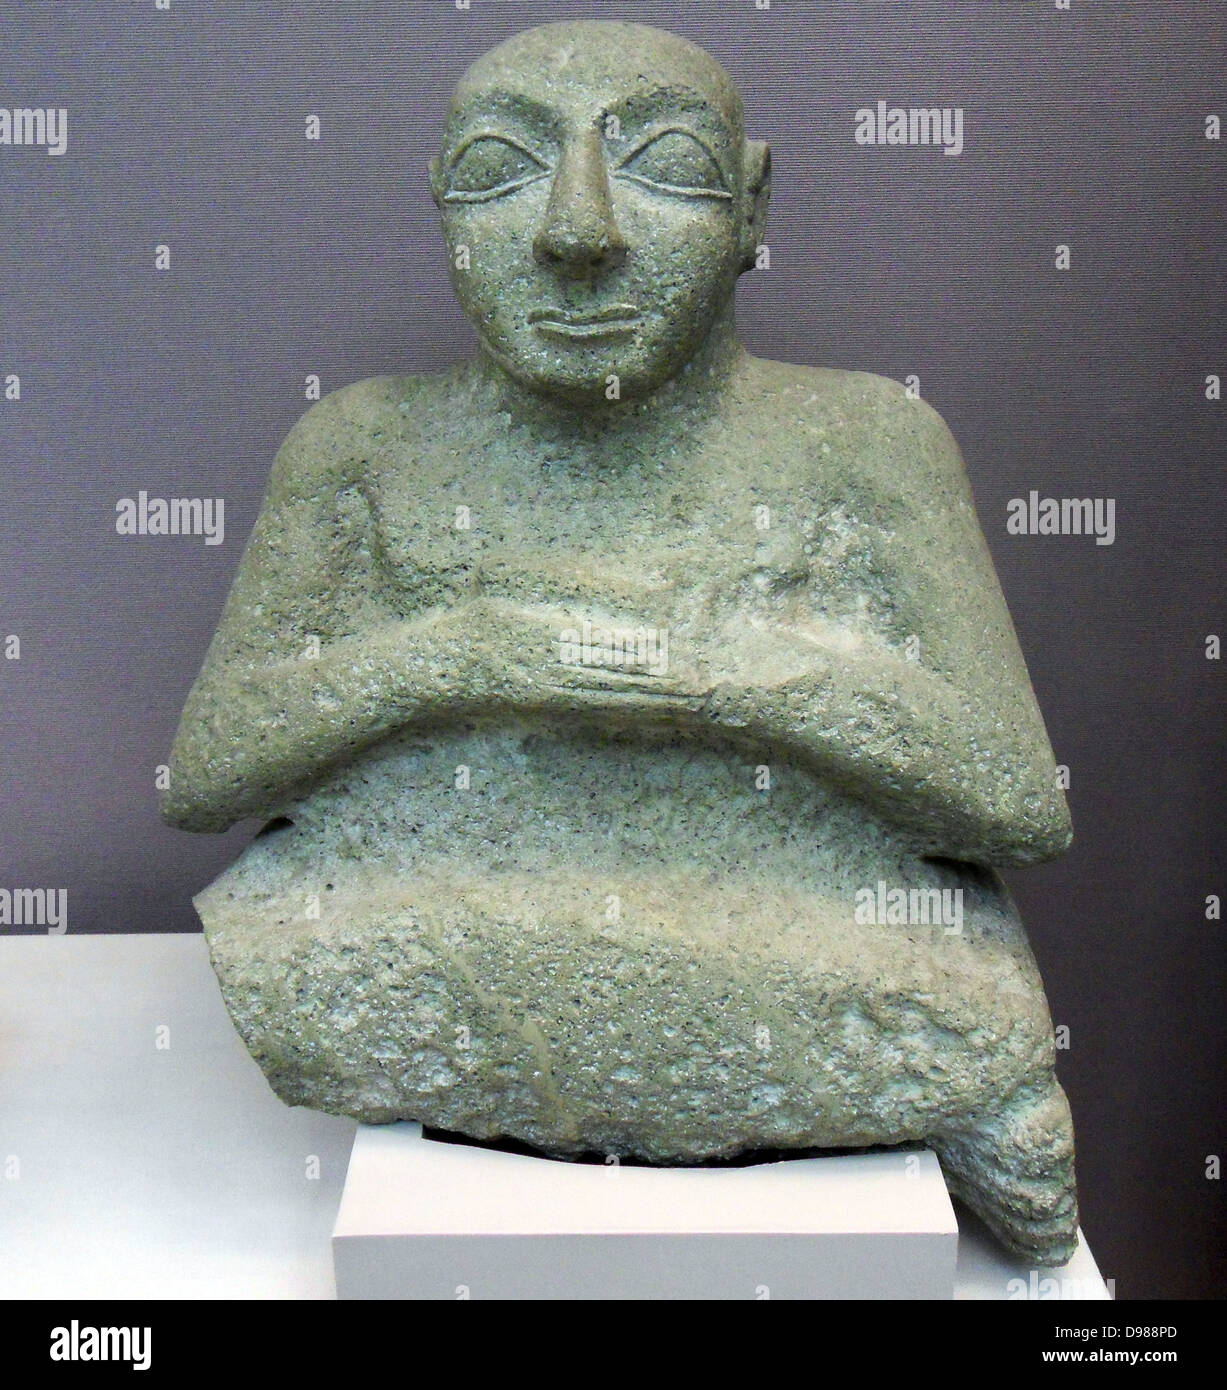 Stone statue of Kurlil From Tell al-'Ubaid, southern Iraq, Early Dynastic period, about 2500 BC. Found next to the Temple of Stock Photo